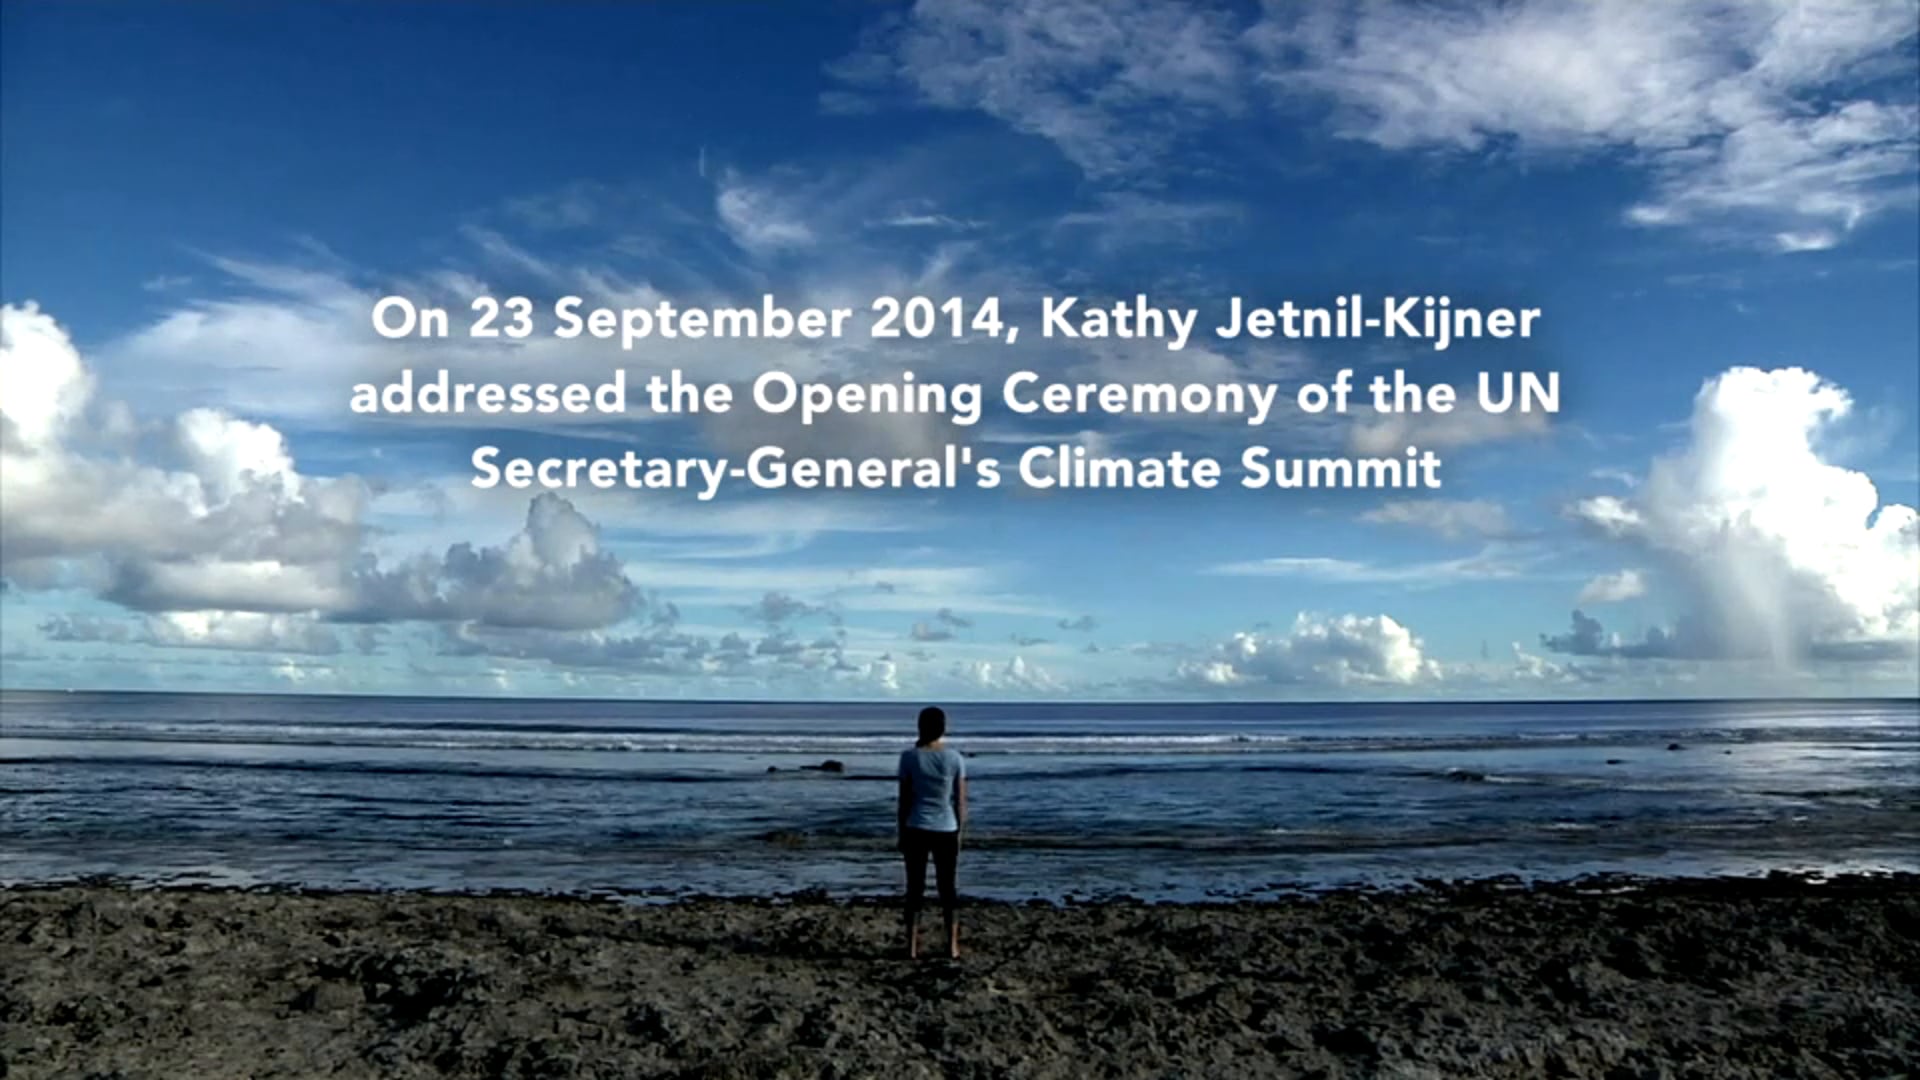 United Nations Climate Campaign - UN Climate Summit Inaugural Video - Poet Kathy Jetnil-Kijiner